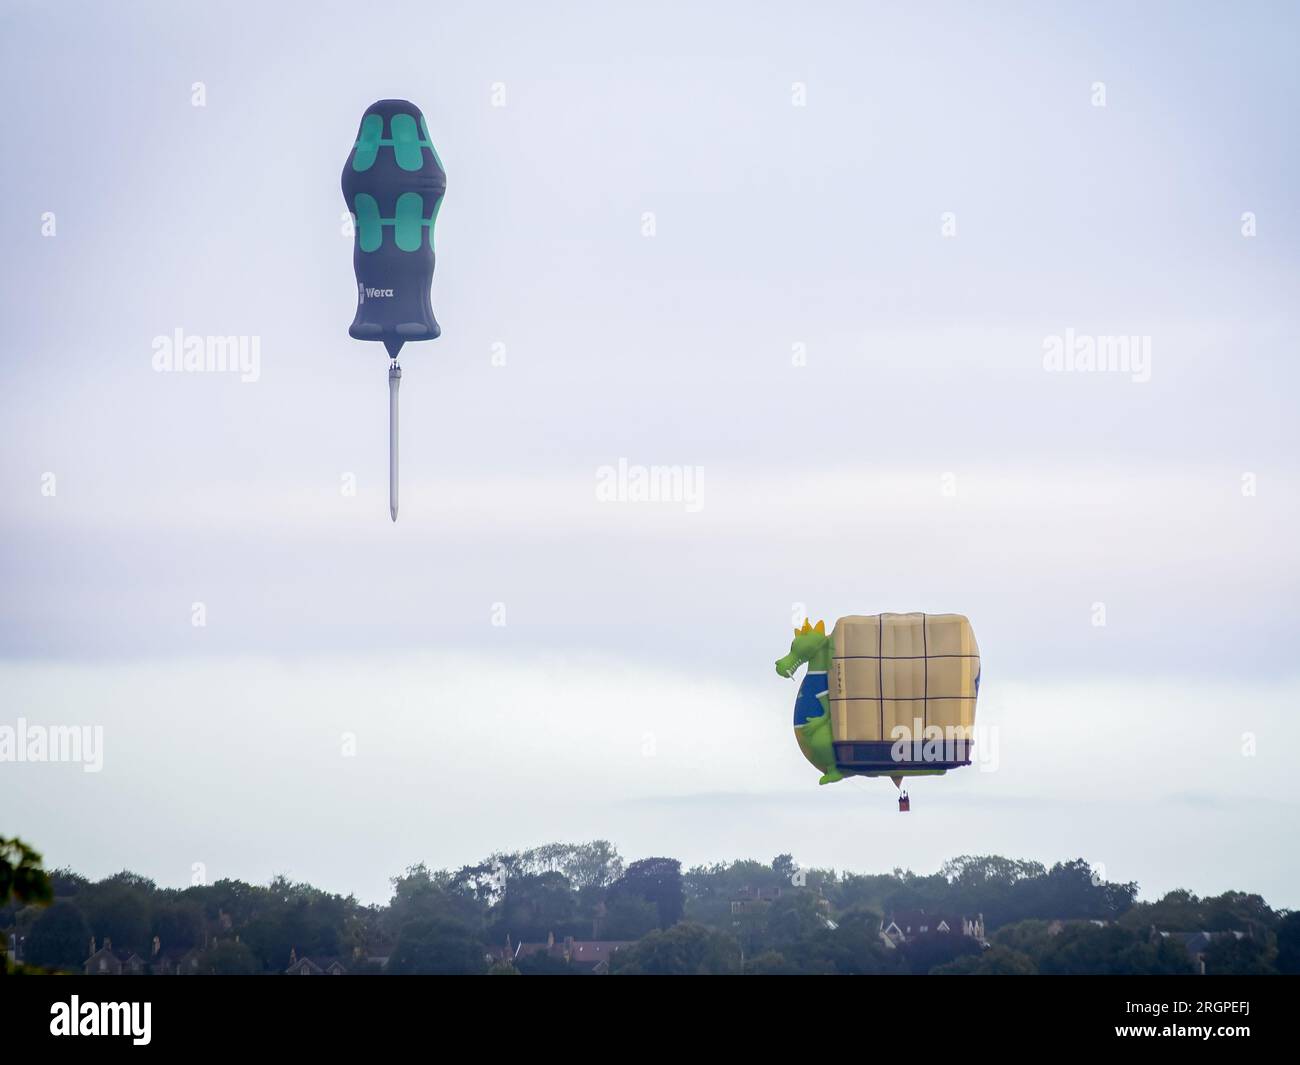 Screwdriver shaped hot air balloon flying over Clifton Suspension Bridge Stock Photo